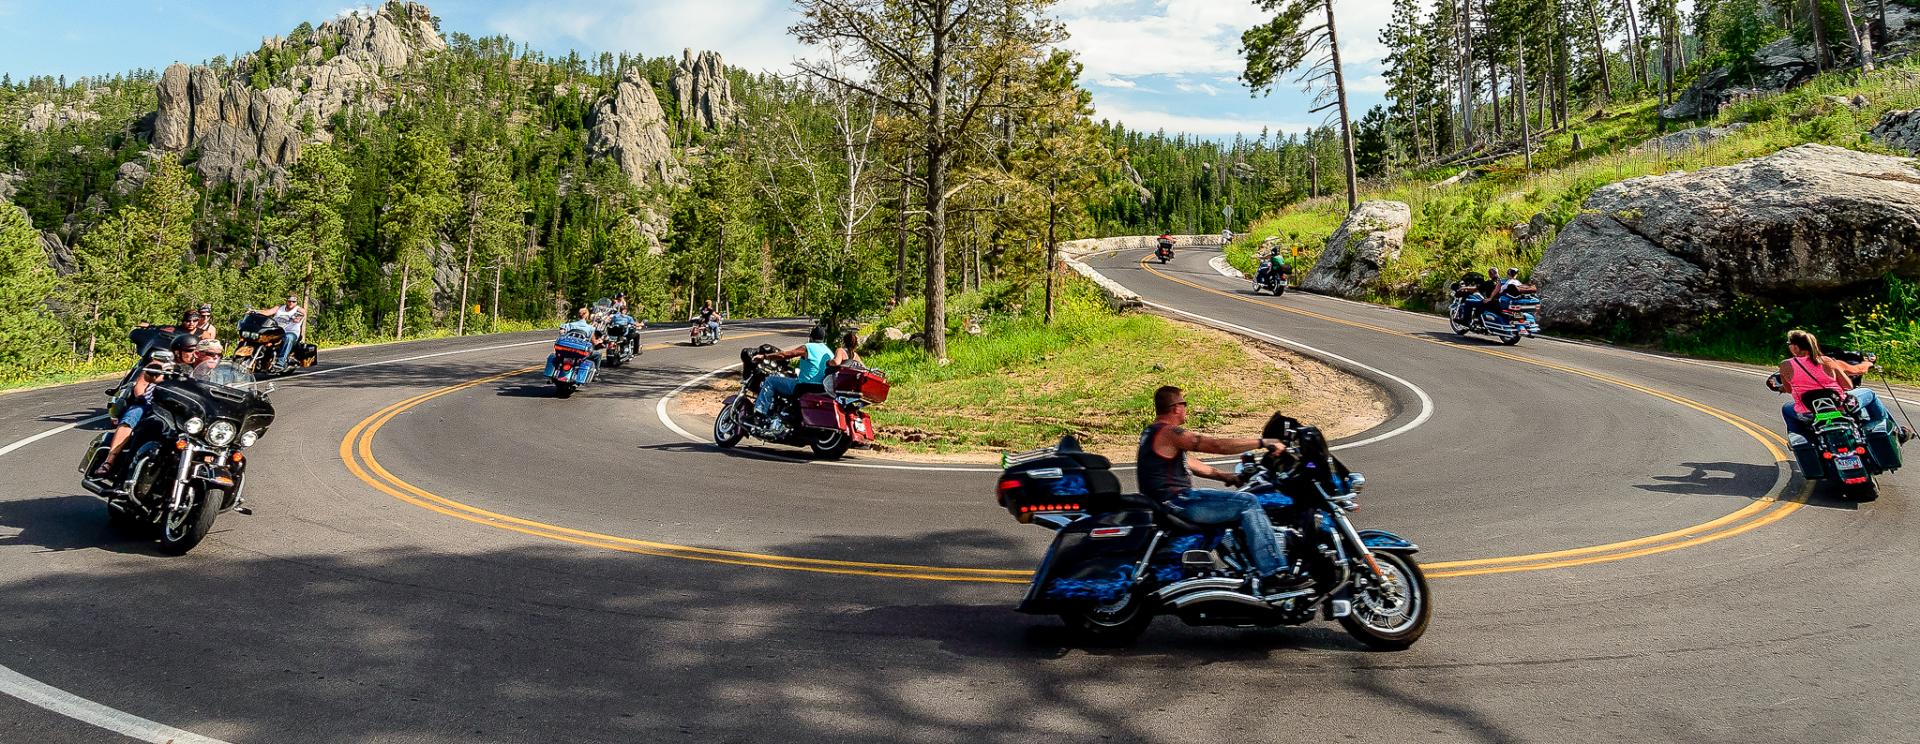 84th Annual Sturgis Motorcycle Rally